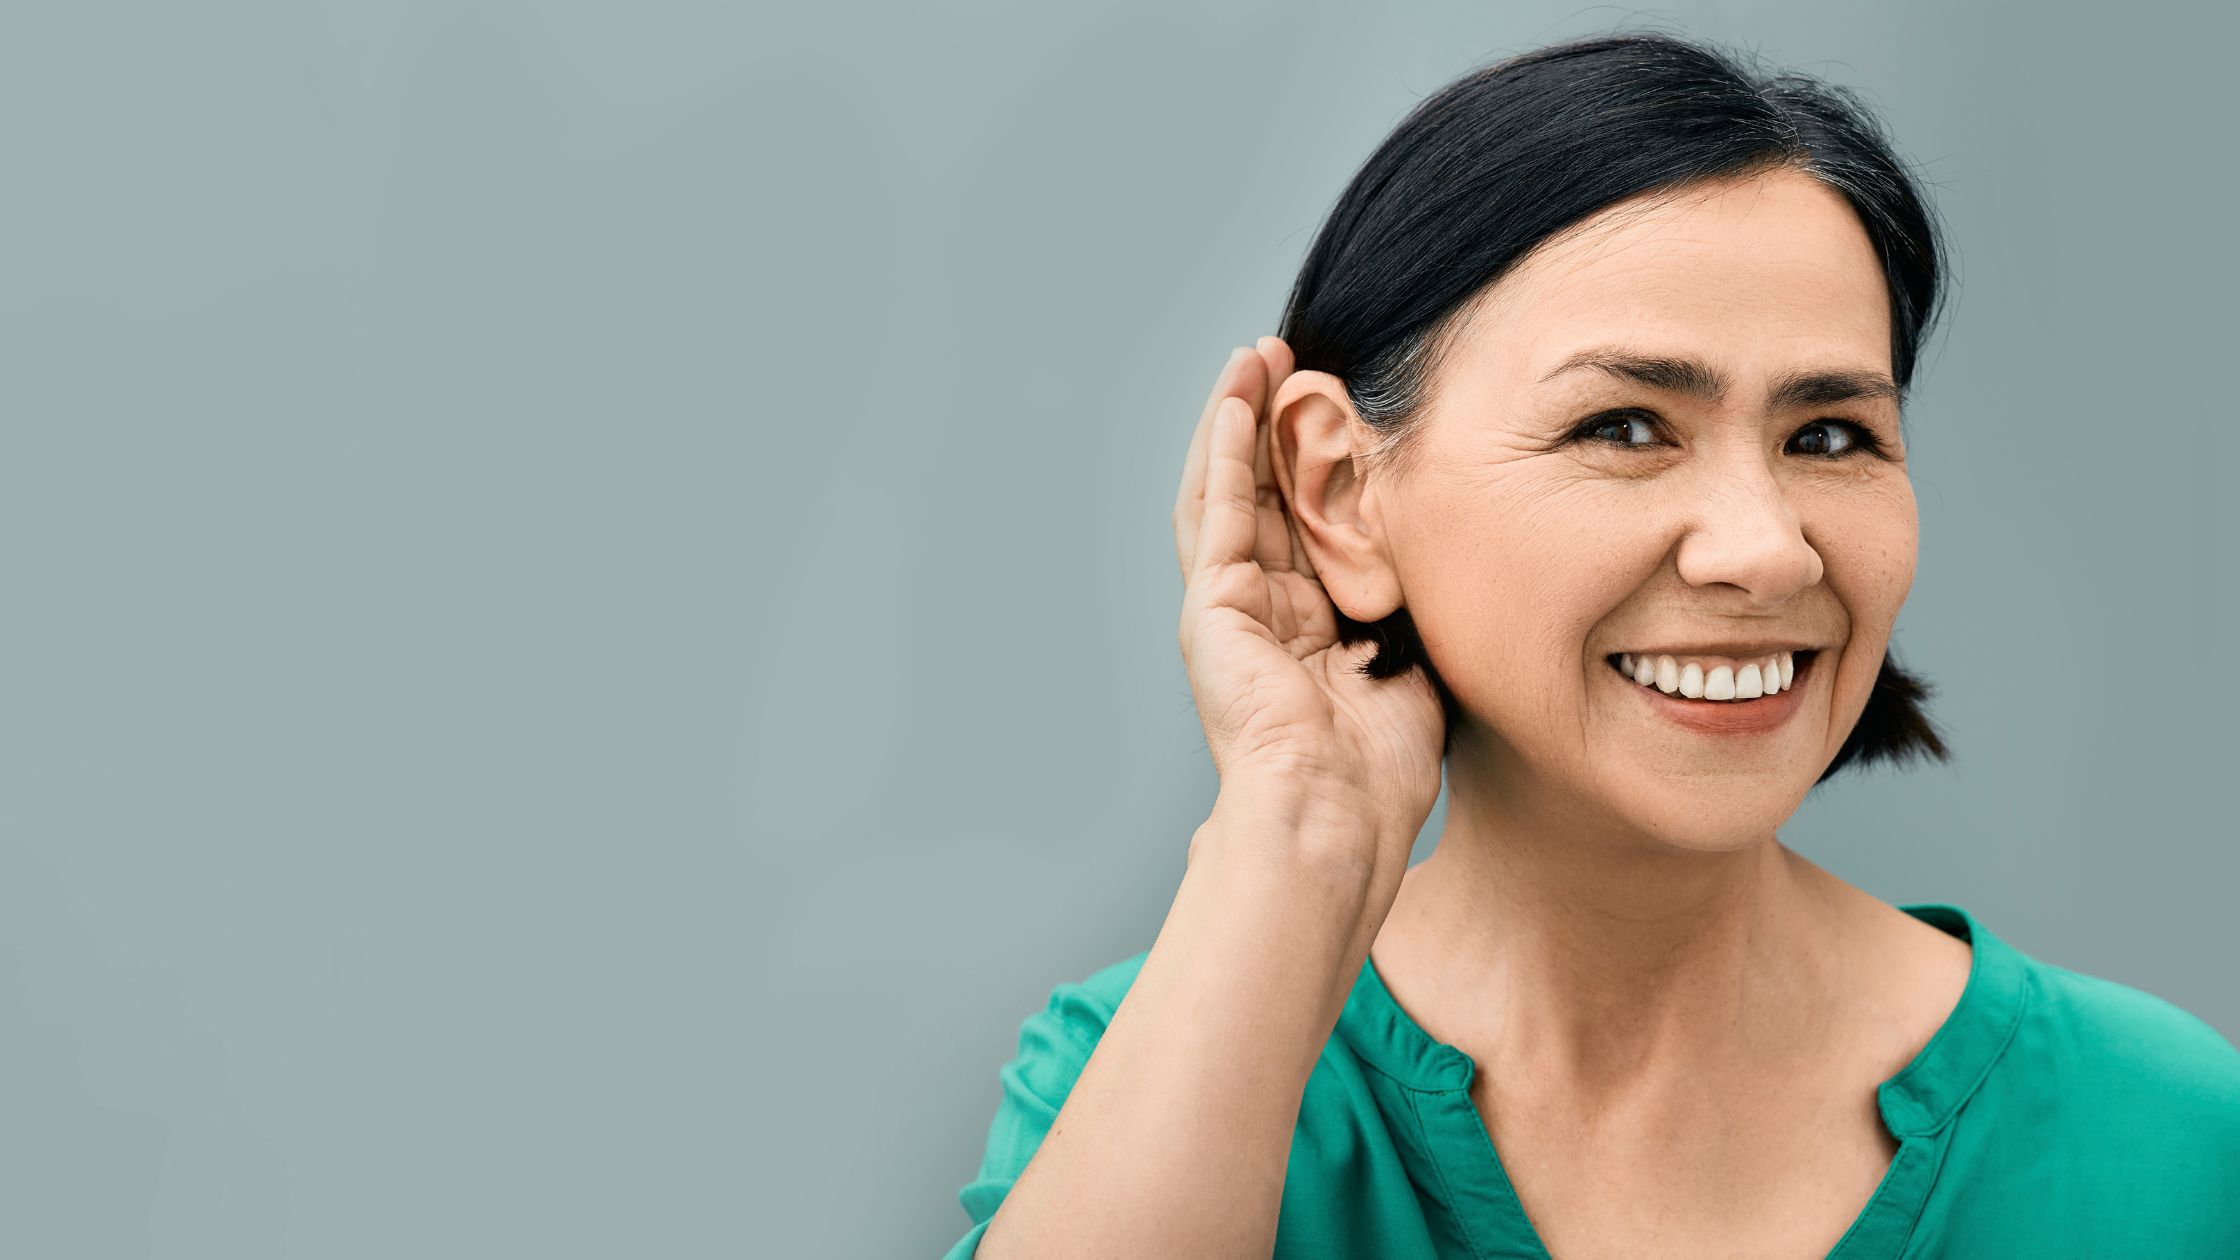 Hear clearer. Ear wax removal in Christchurch with Phoenix Healthcare.